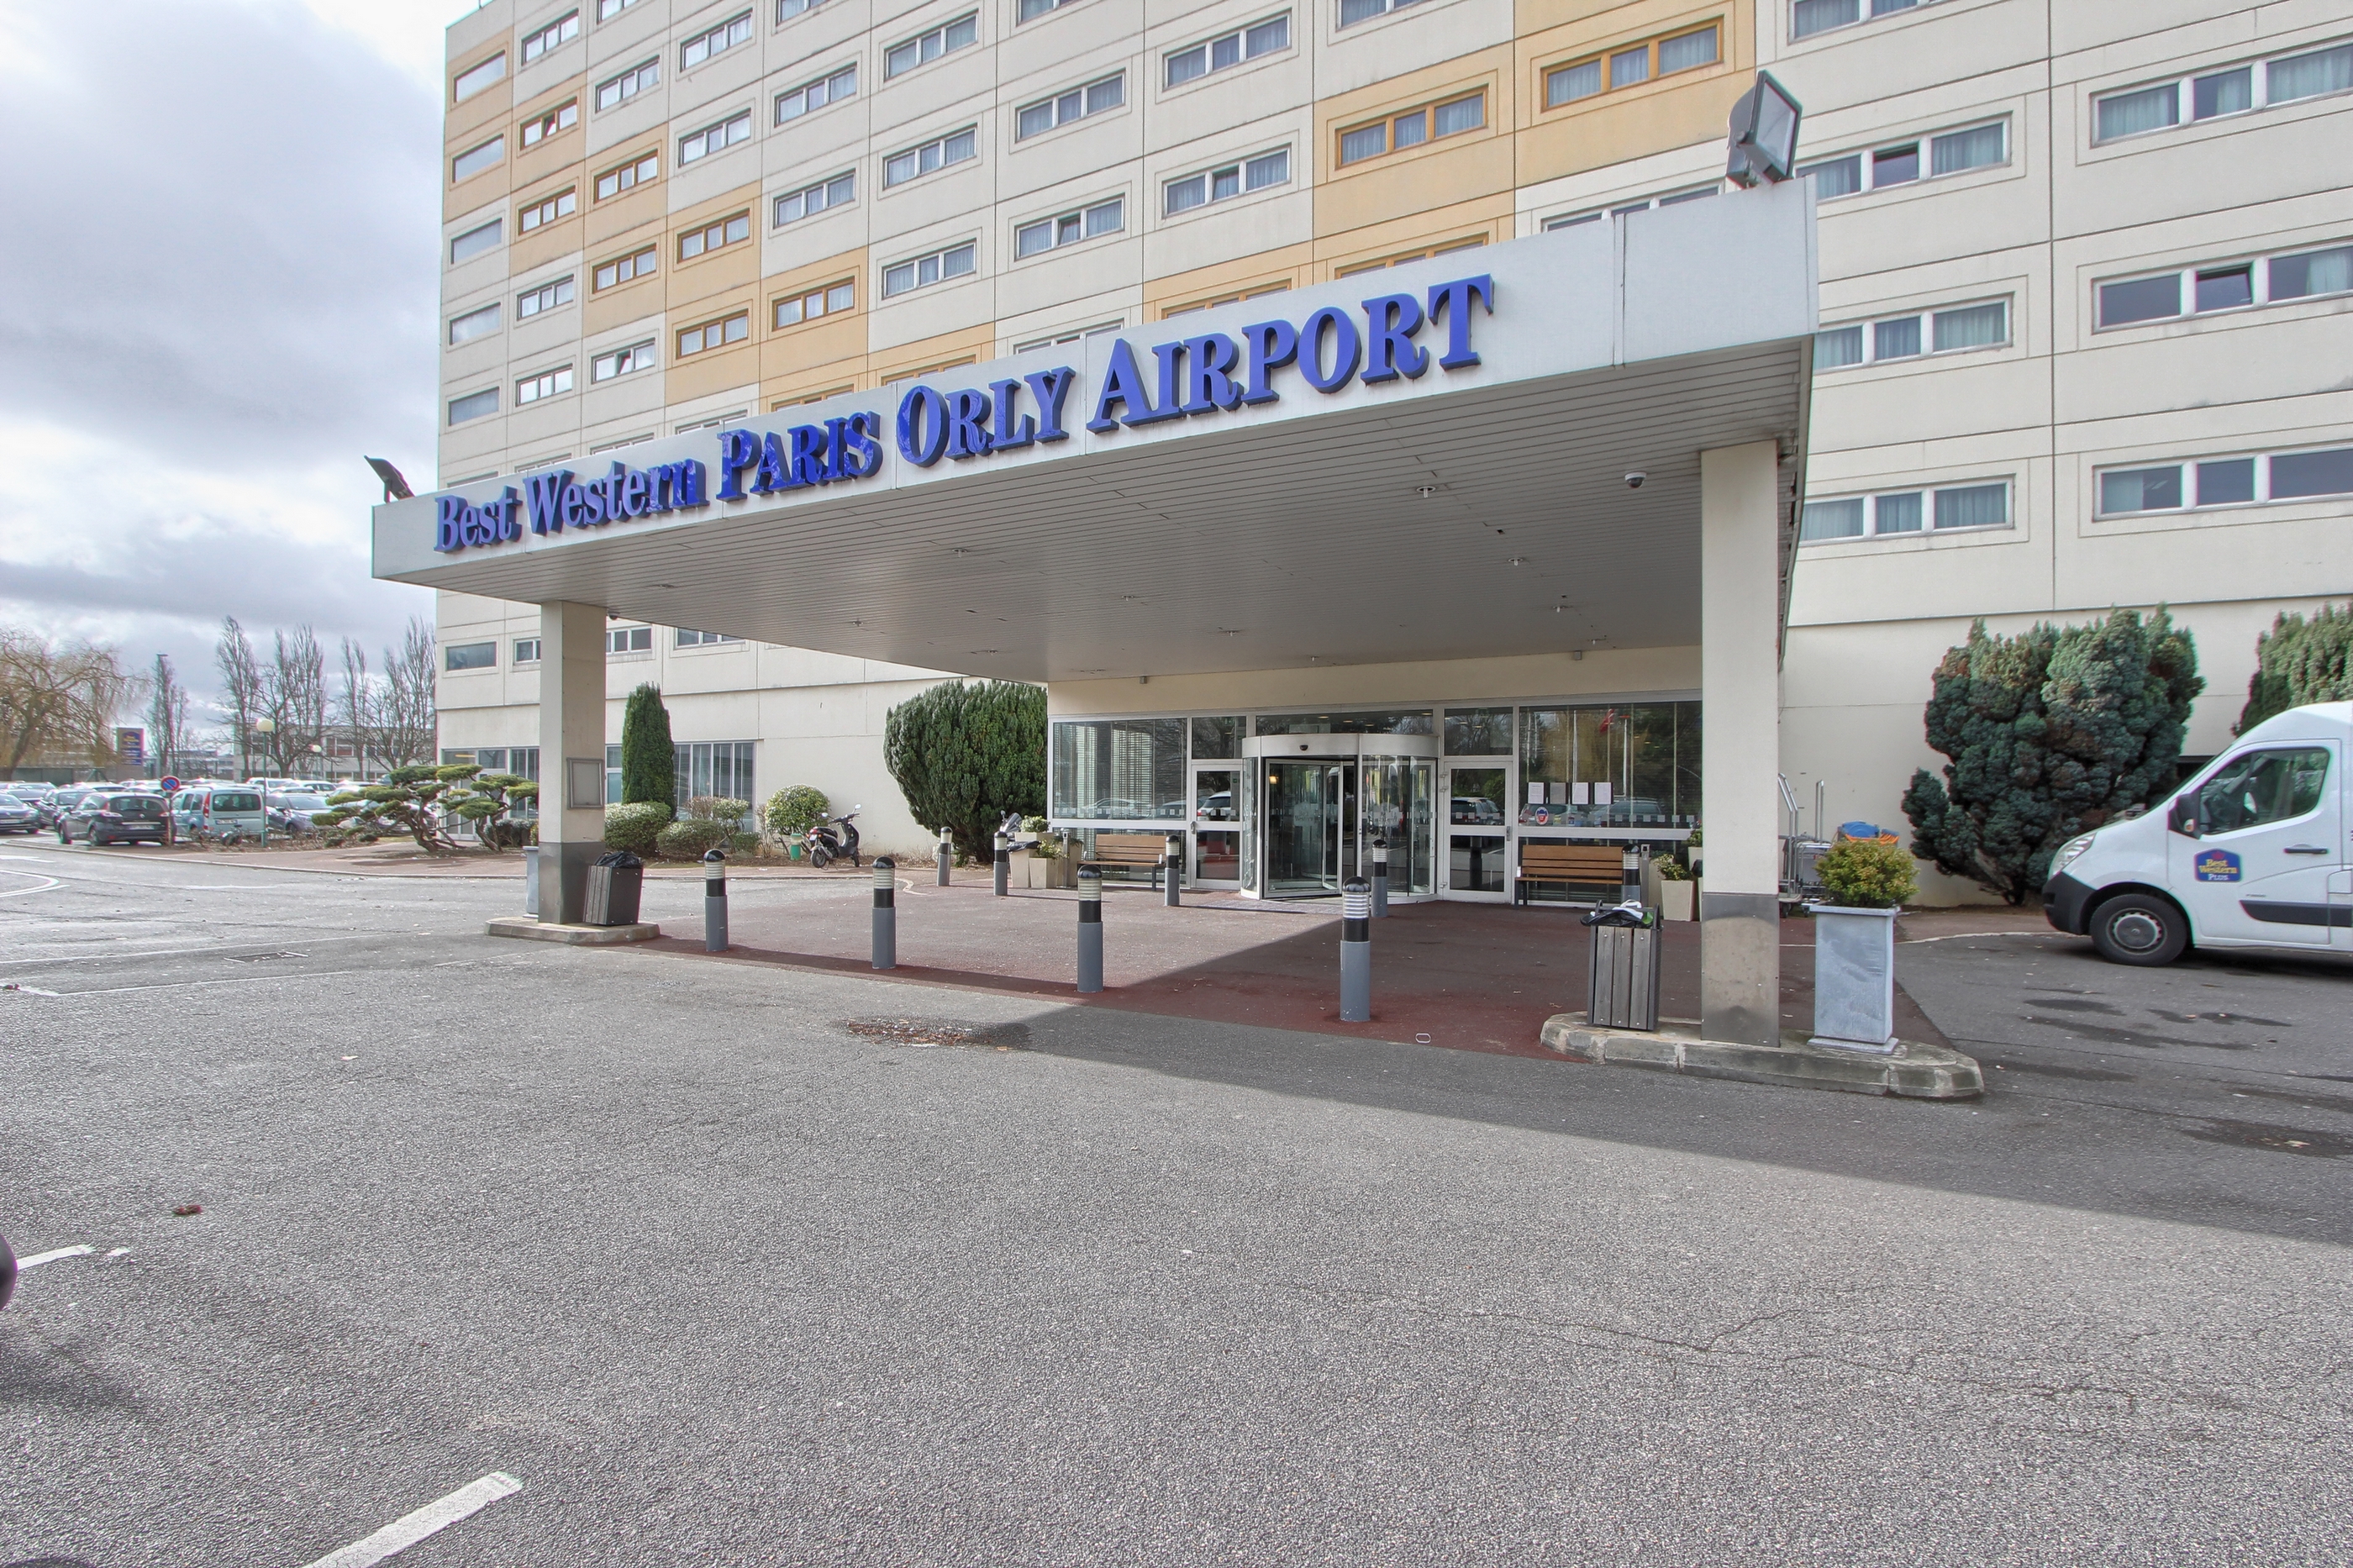 Hotel Best Western Paris Orly Airport image